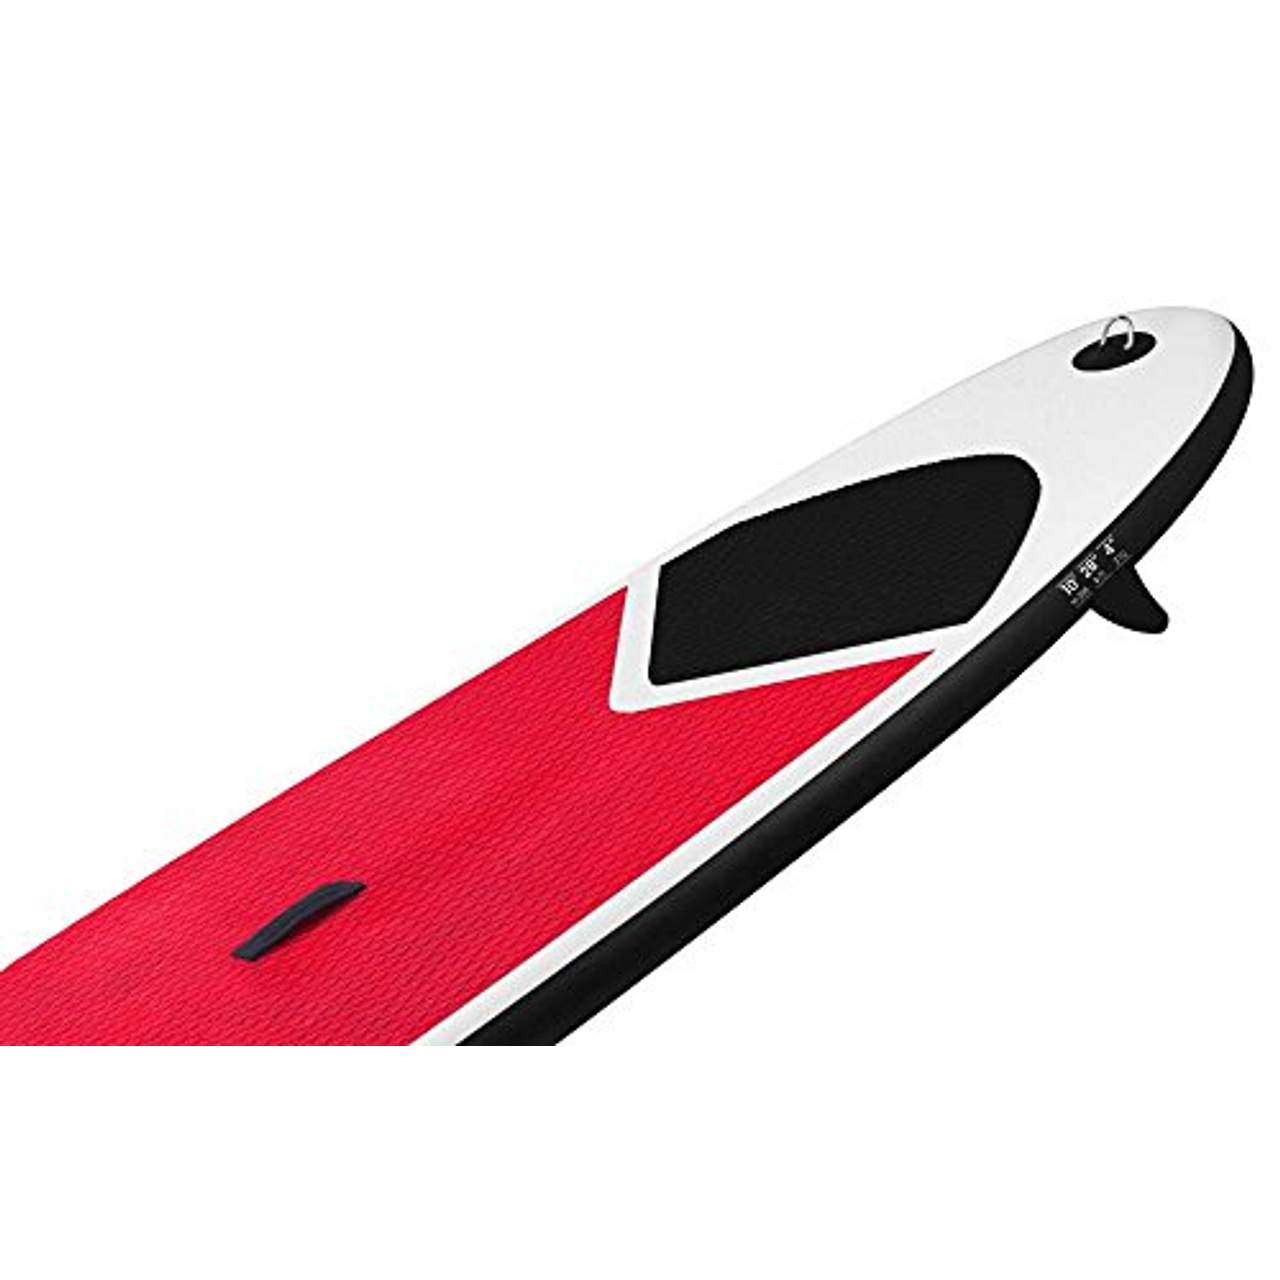 XQ Max SUP aufblasbares Stand Up Paddle Board Set 305 in Rot